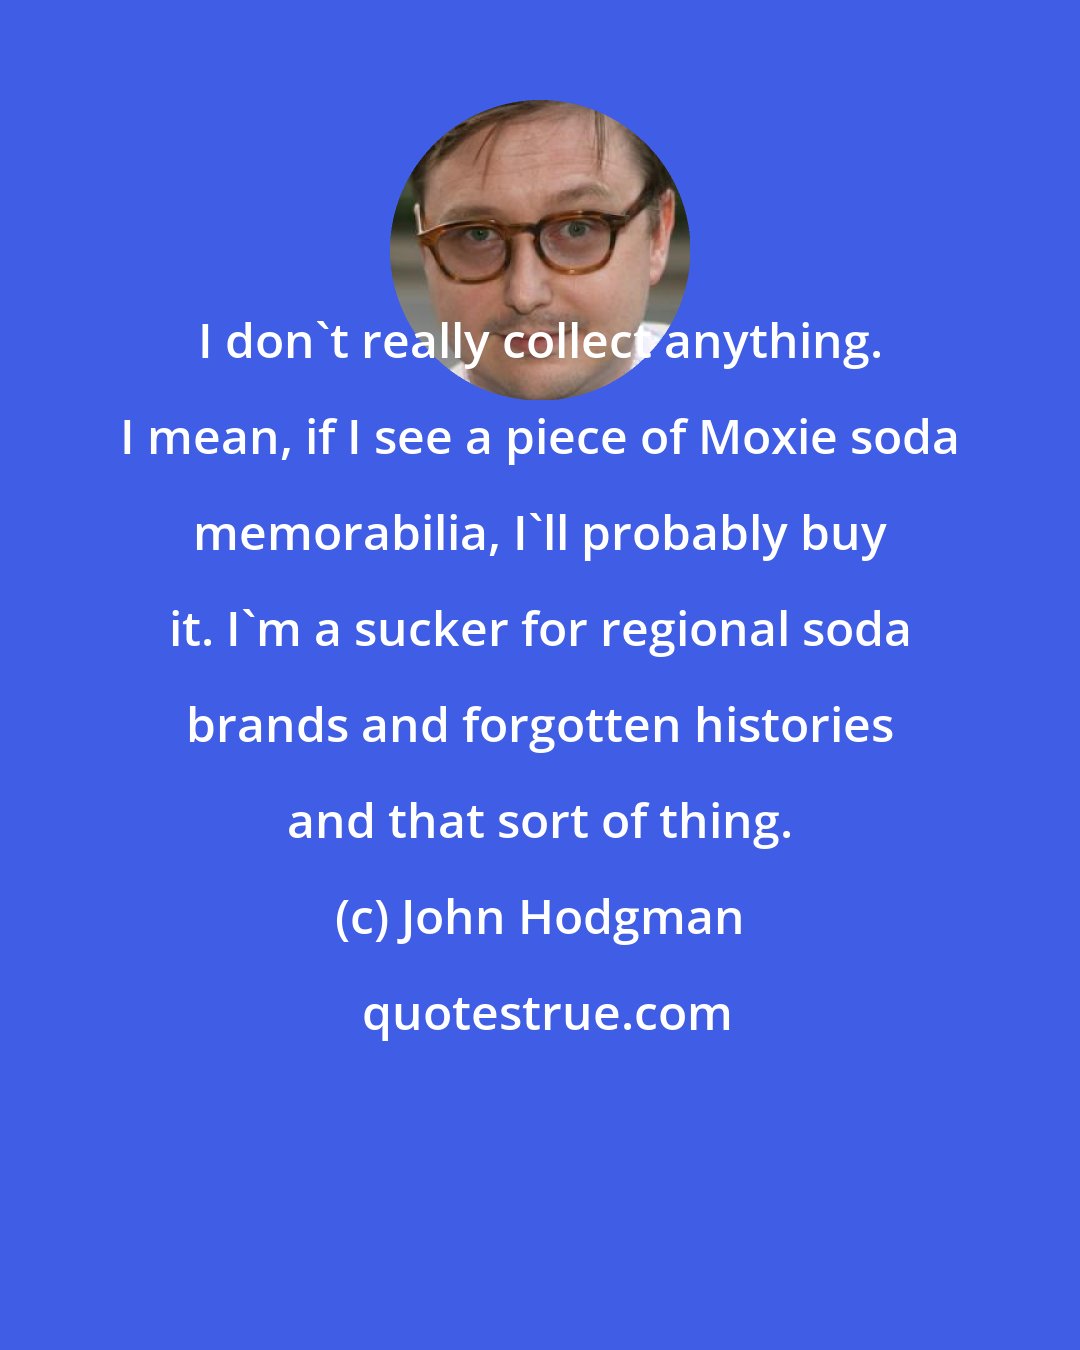 John Hodgman: I don't really collect anything. I mean, if I see a piece of Moxie soda memorabilia, I'll probably buy it. I'm a sucker for regional soda brands and forgotten histories and that sort of thing.